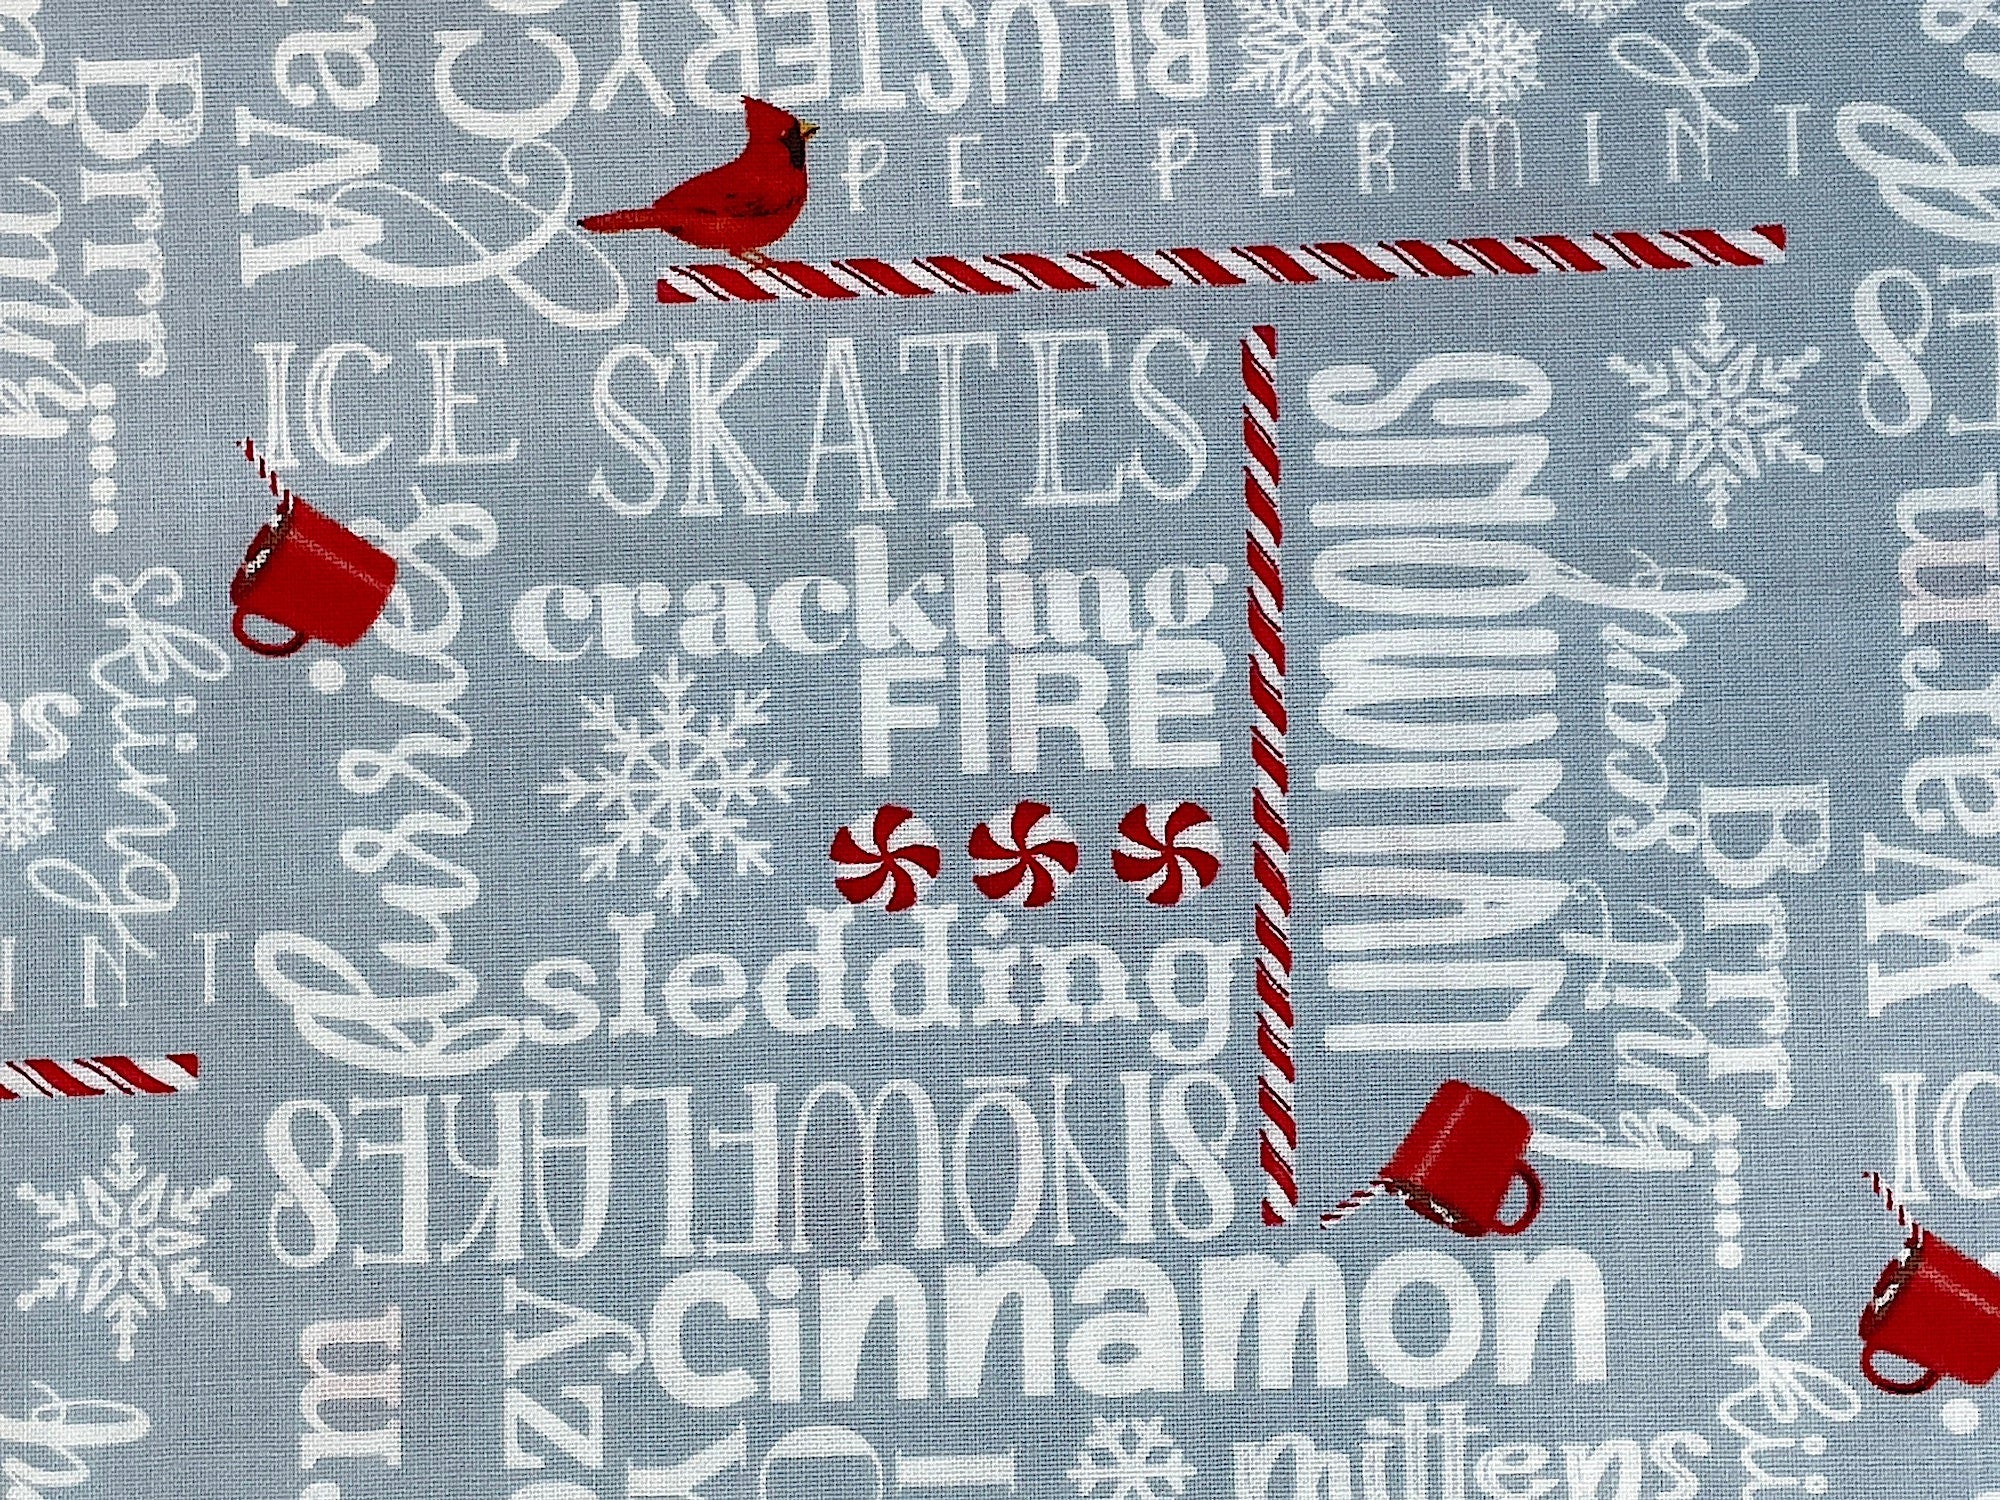 This gray cotton fabric is covered with winter words such as snowman, cinnamon, mittens, peppermint, crackling fire, ice skates and more. You will also find small red birds and red cups of cocoa throughout the fabric along with peppermint sticks.